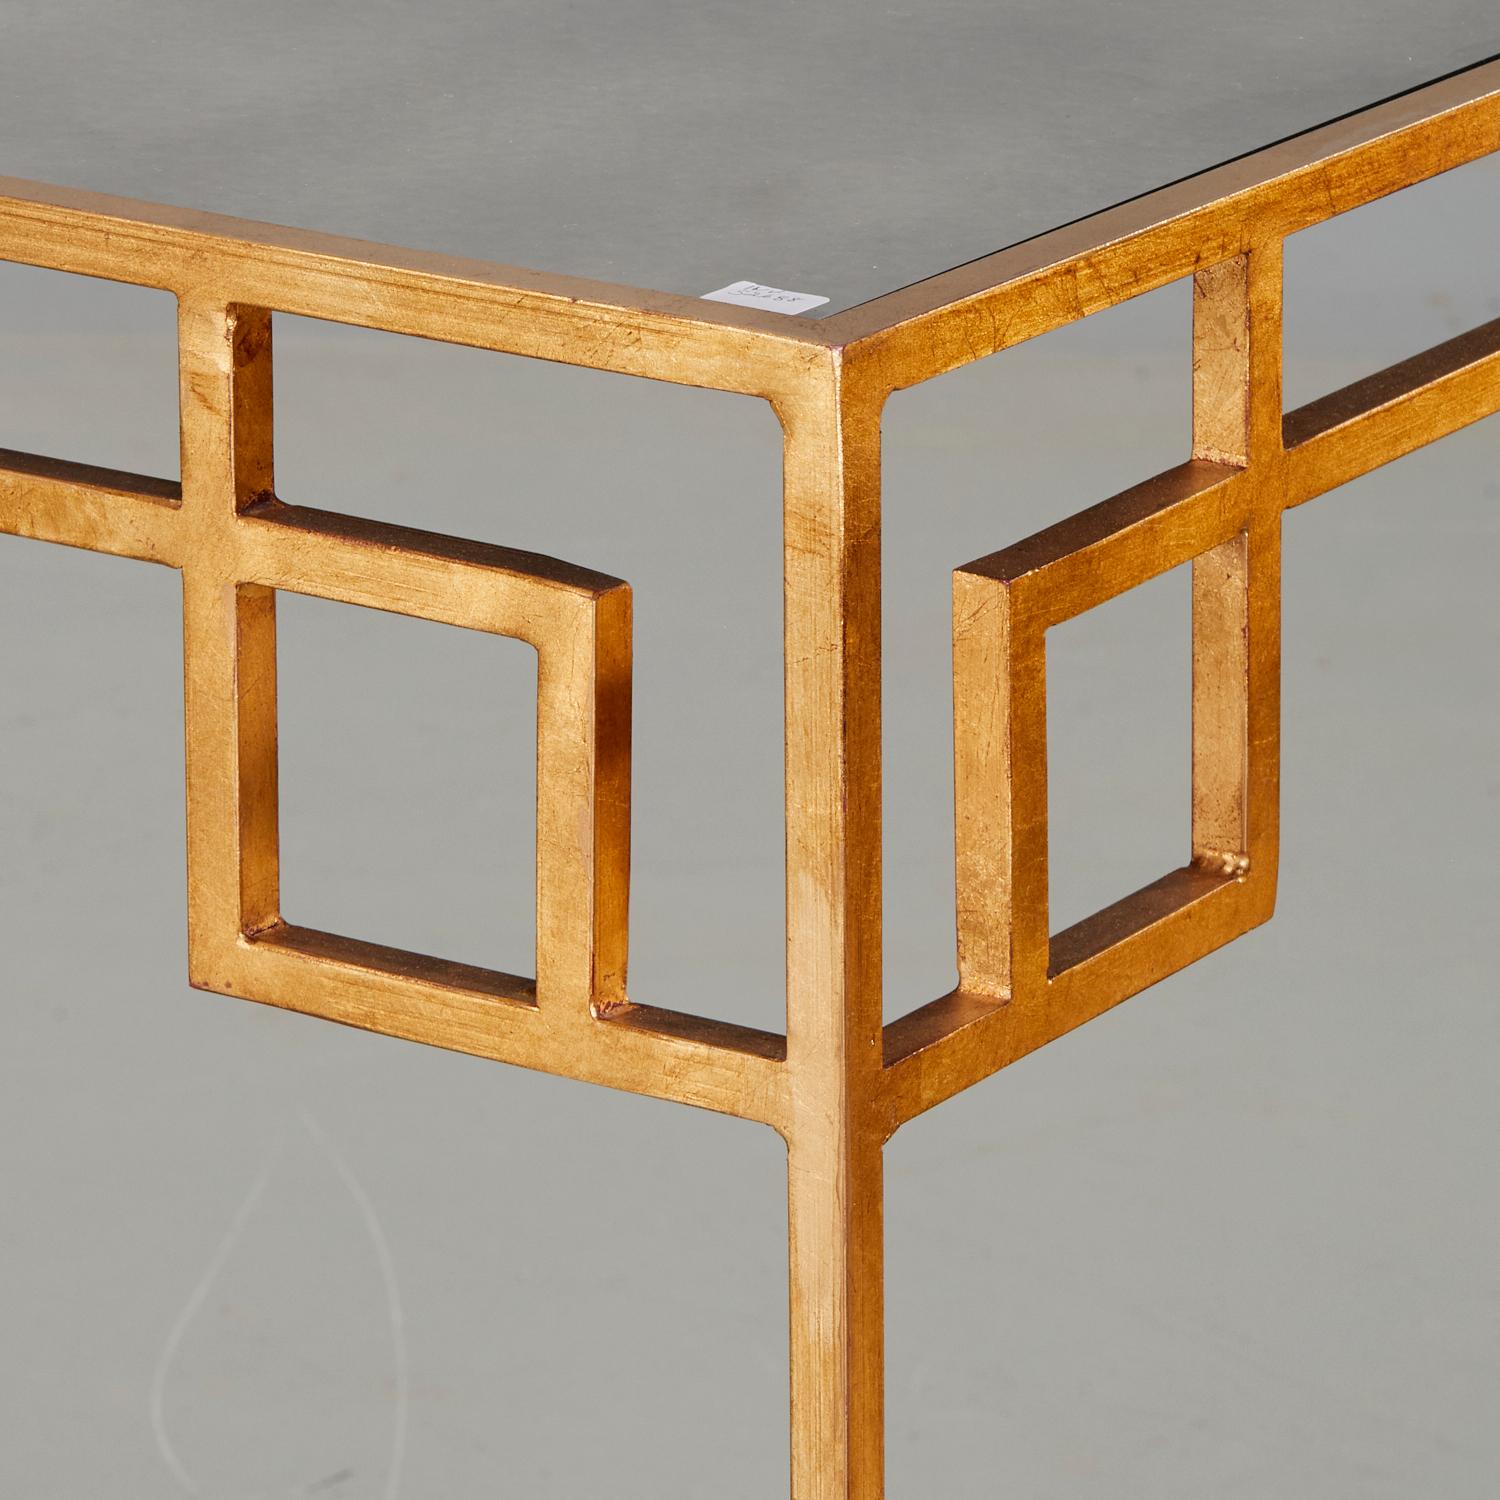 21st c., Two pairs of custom nesting tables in a Greek Key design with smoky inset mirrored glass tops, unmarked. These are very smart looking and highly functional tables. They would work beautifully as end tables. The smokey mirrored glass top